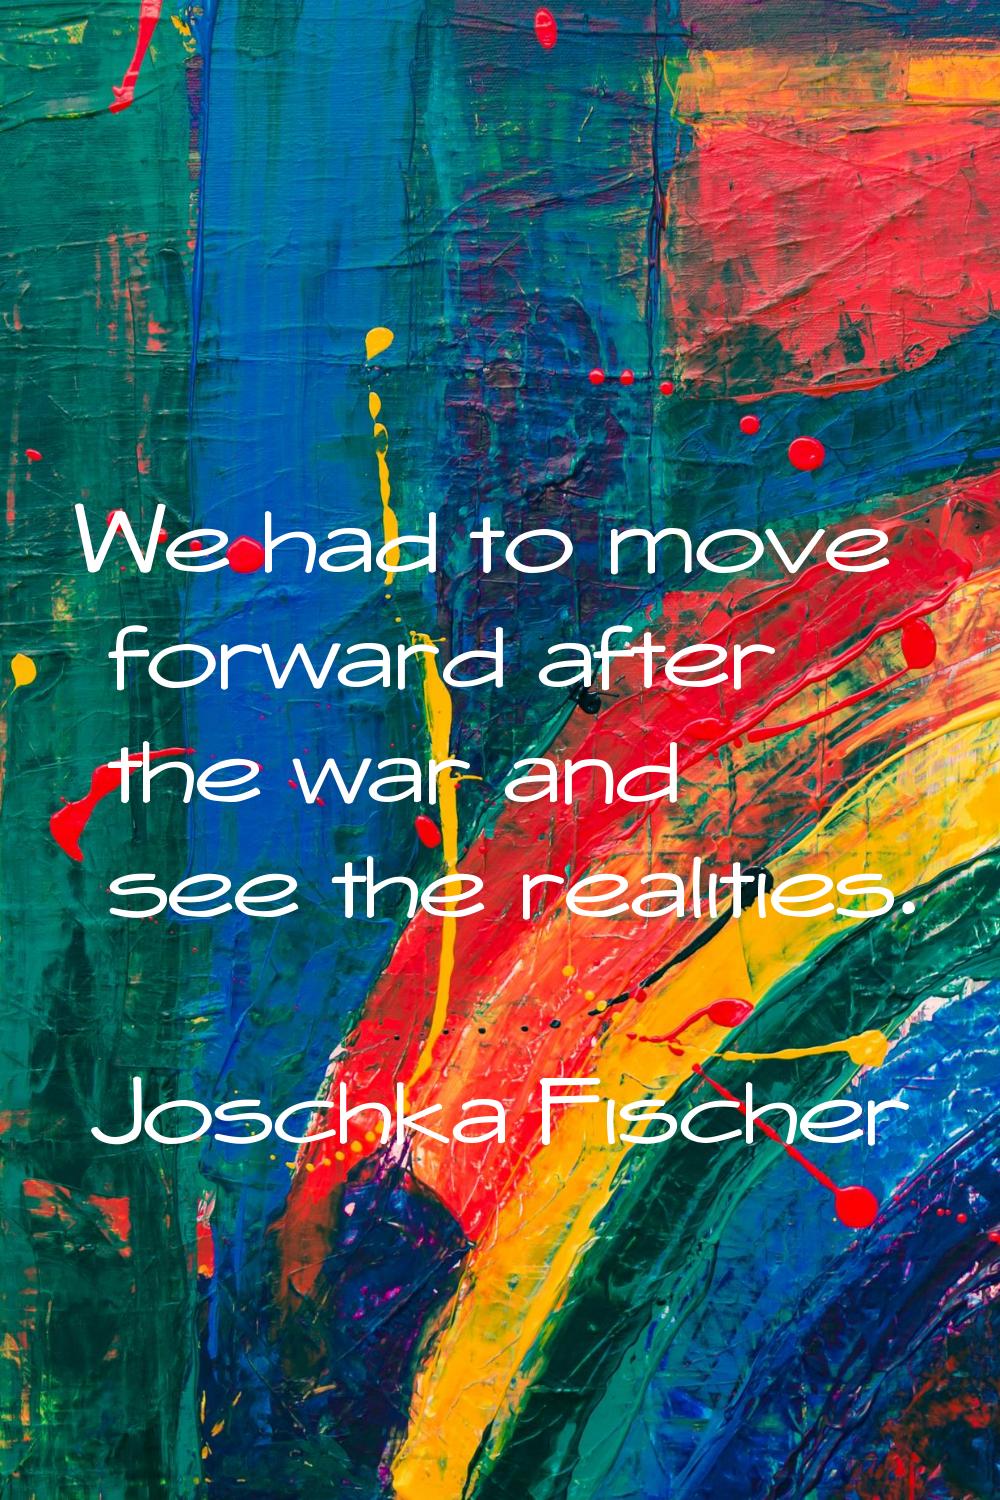 We had to move forward after the war and see the realities.